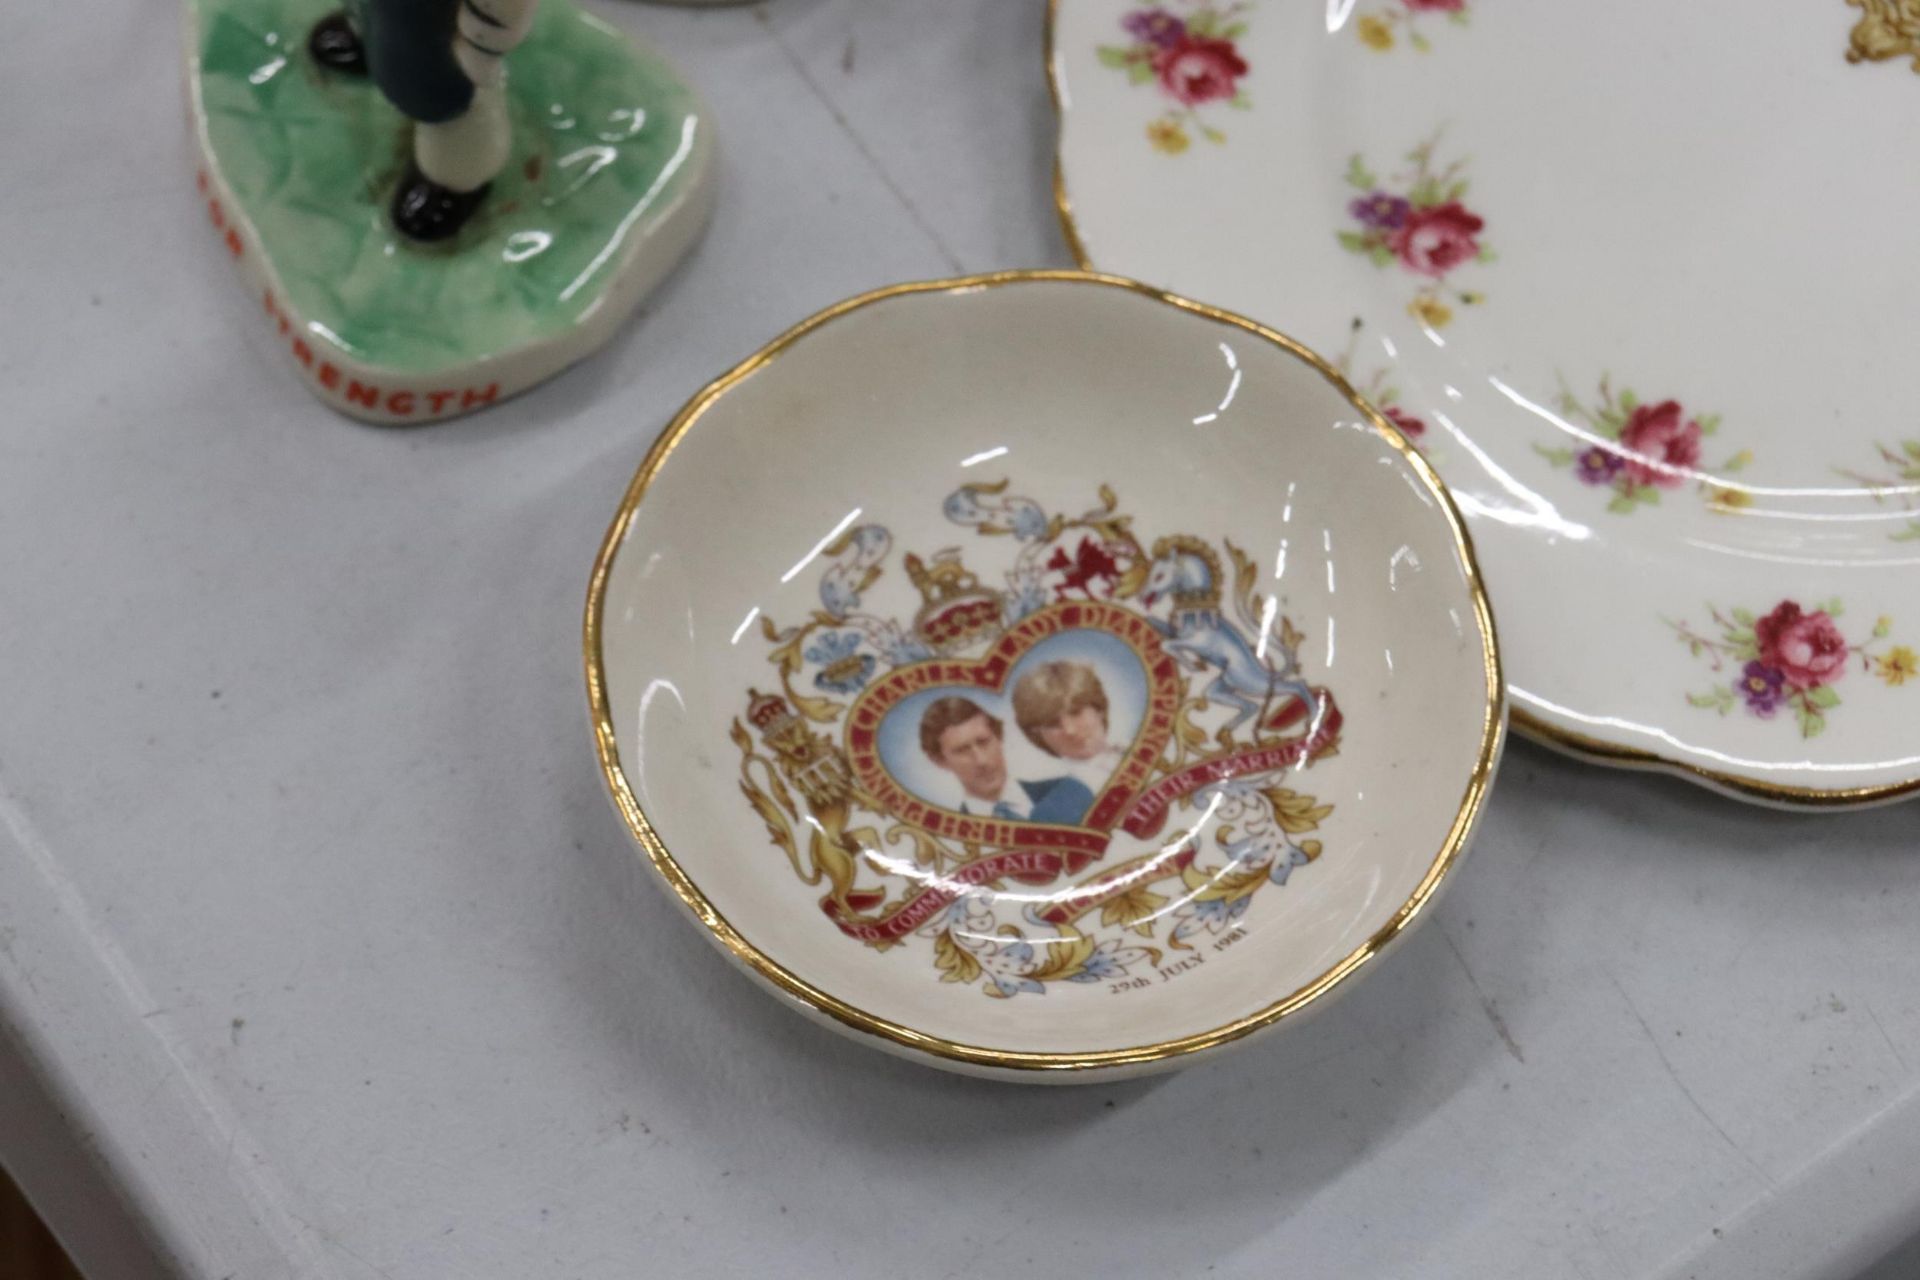 A COLLECTION OF ROYAL COMMEMORATIVE ITEMS TO INCLUDE CUPS, PLATES, PLUS GUINNESS CERAMICS - Image 4 of 11